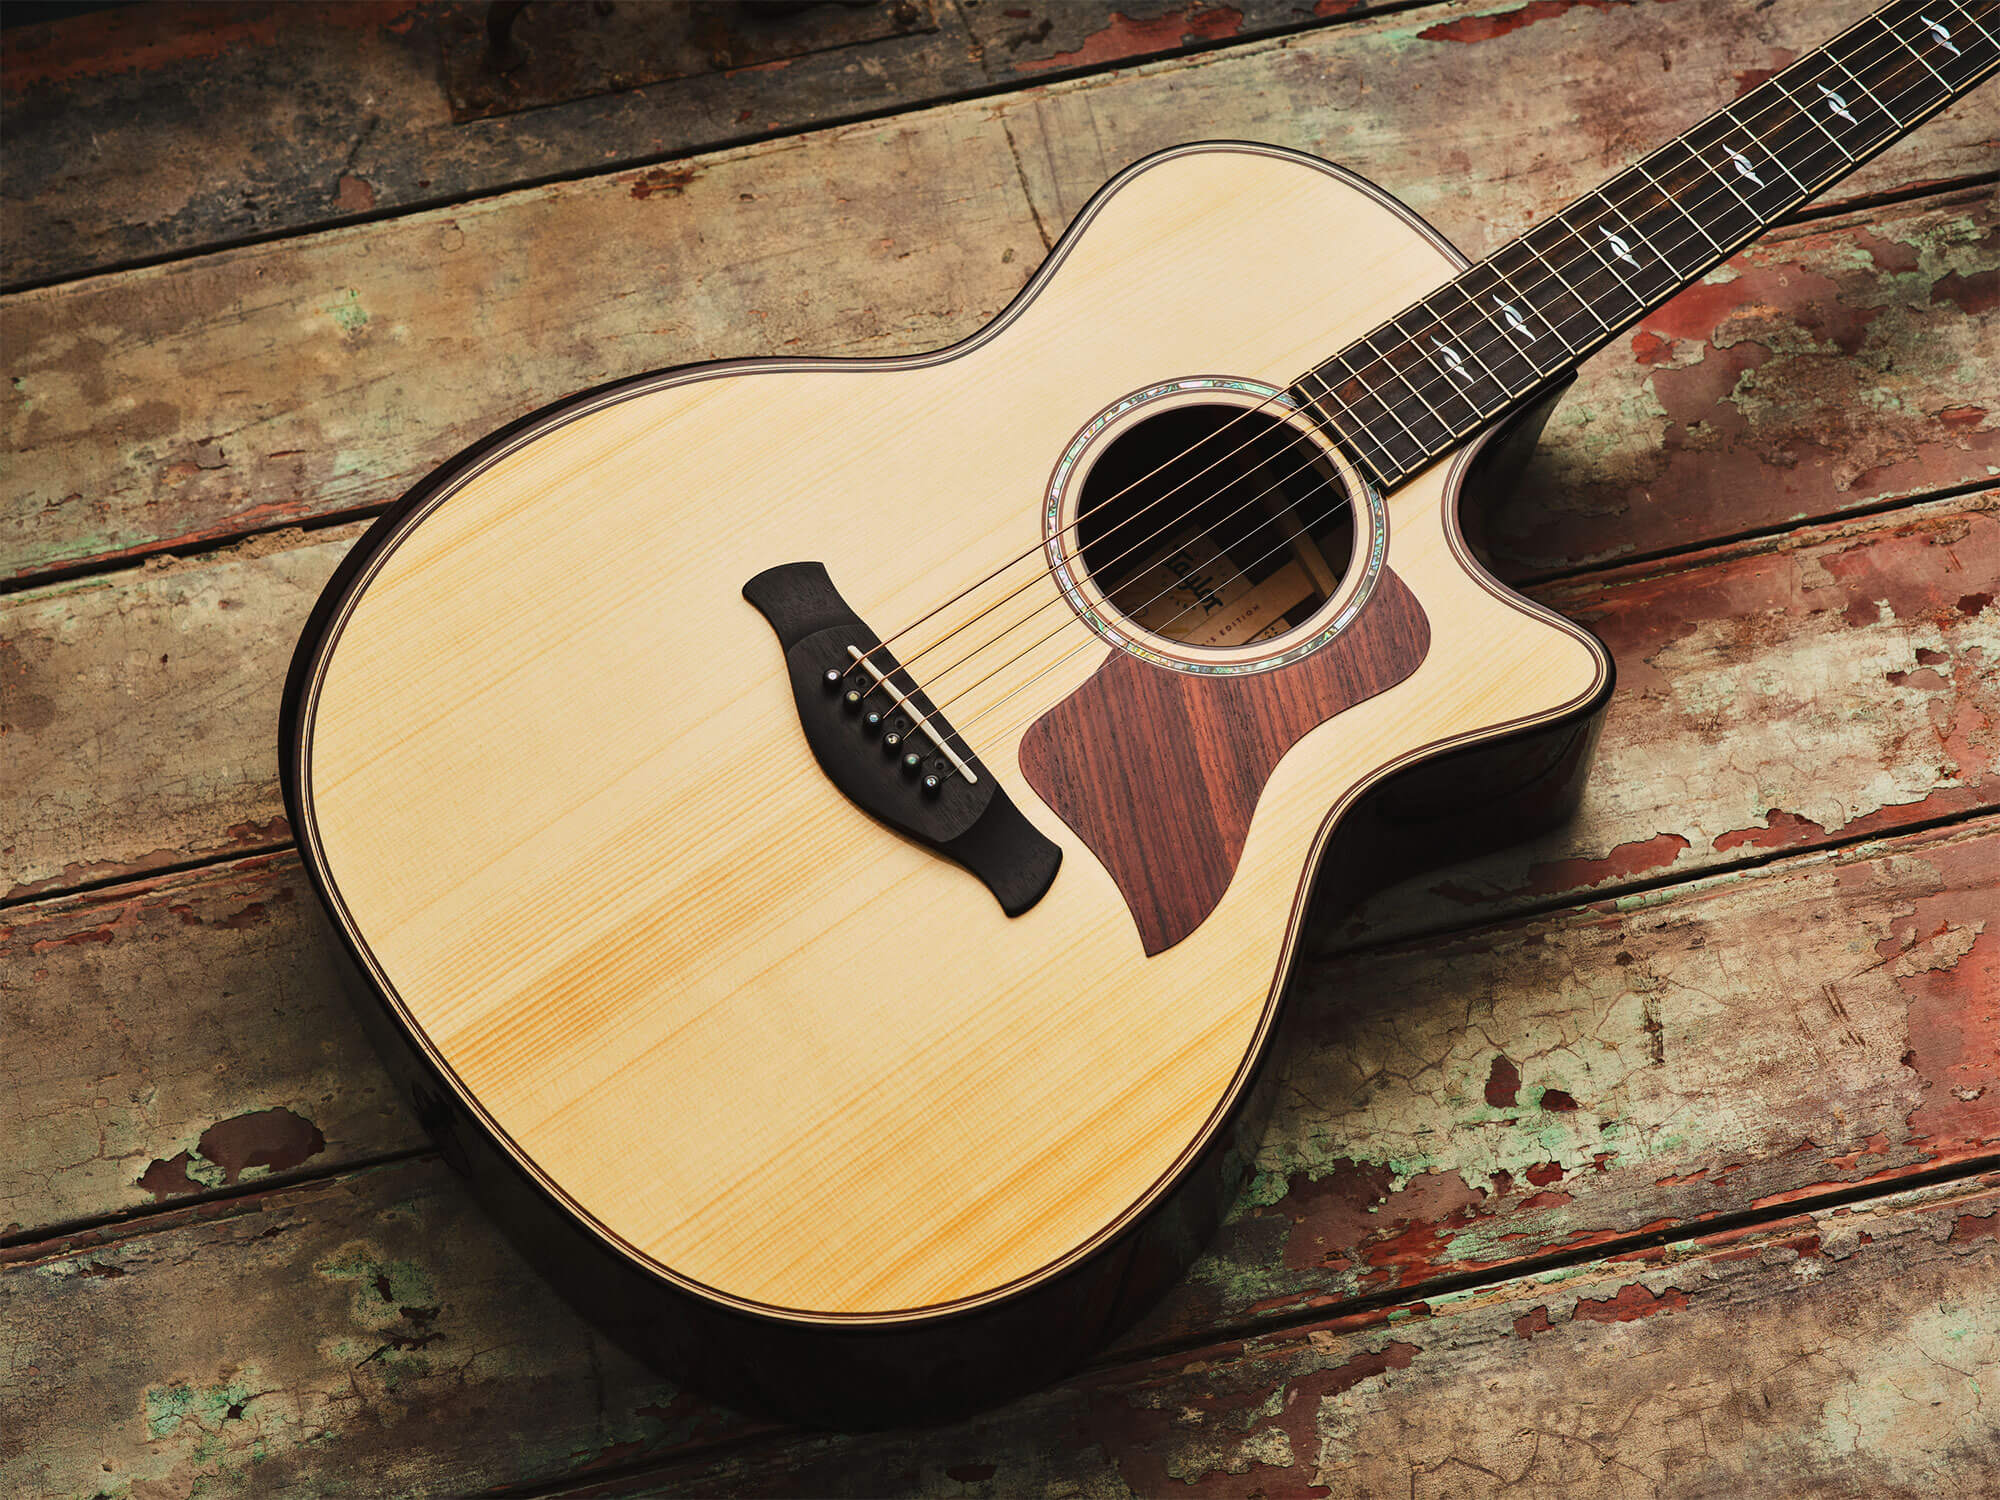 Taylor Builder's Edition acoustic laid flat on a wooden surface